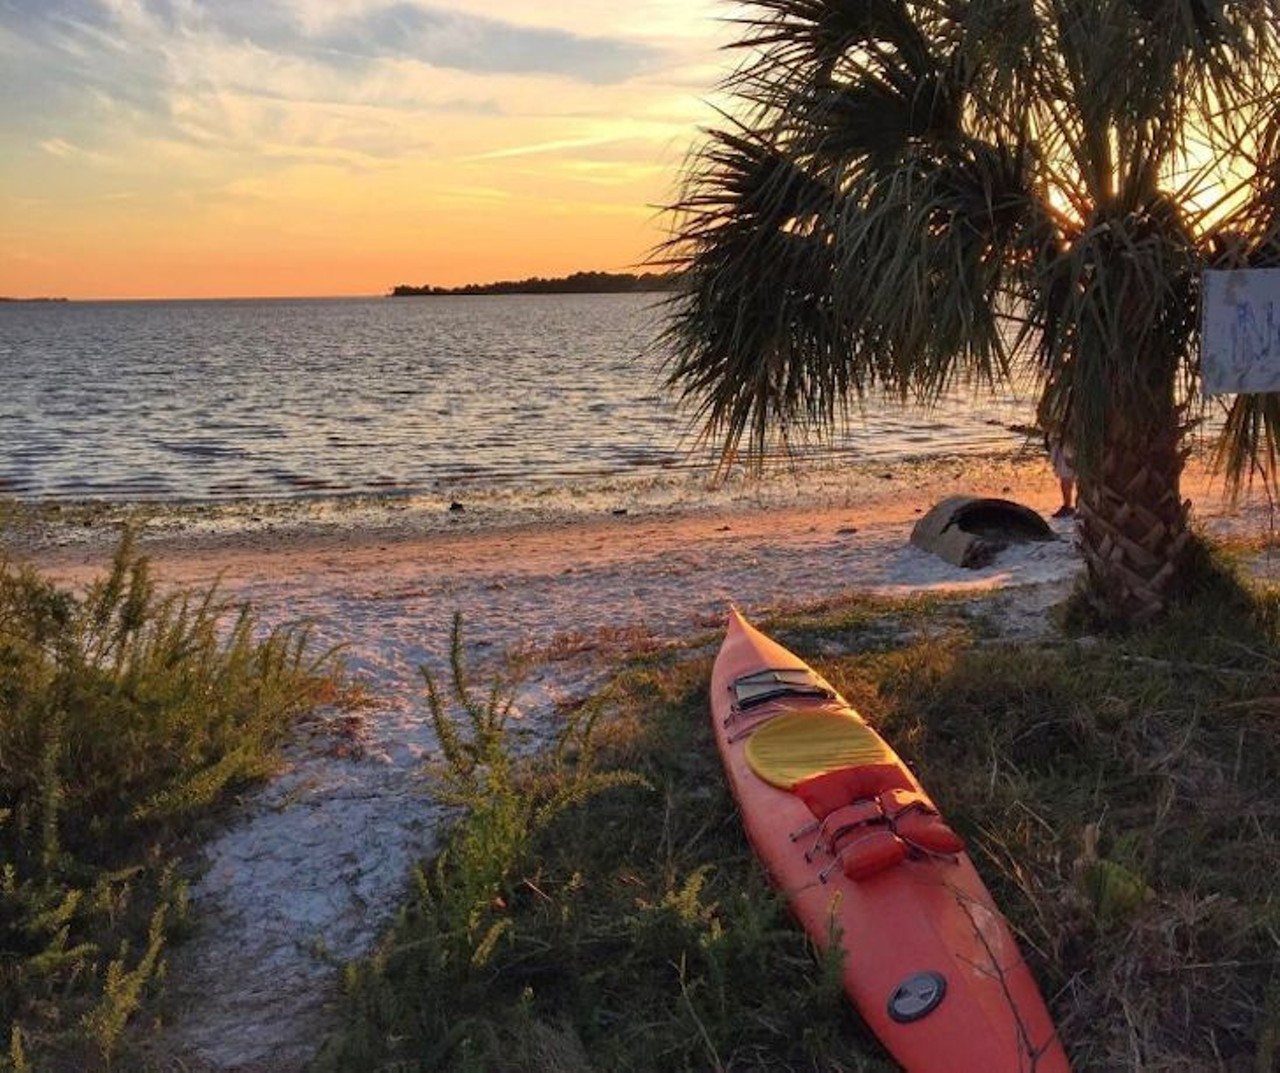 Cedar Key
2 hours, 20 minutes away
This quaint, old-fashioned beach town might seem snoozy to some, but don&#146;t let its lack of traffic lights spooky you: After a day spent on the shore, you&#146;ll find plenty of places to knock back a cold brew and some clam chowder. 
Photo via pmarlin/Instagram